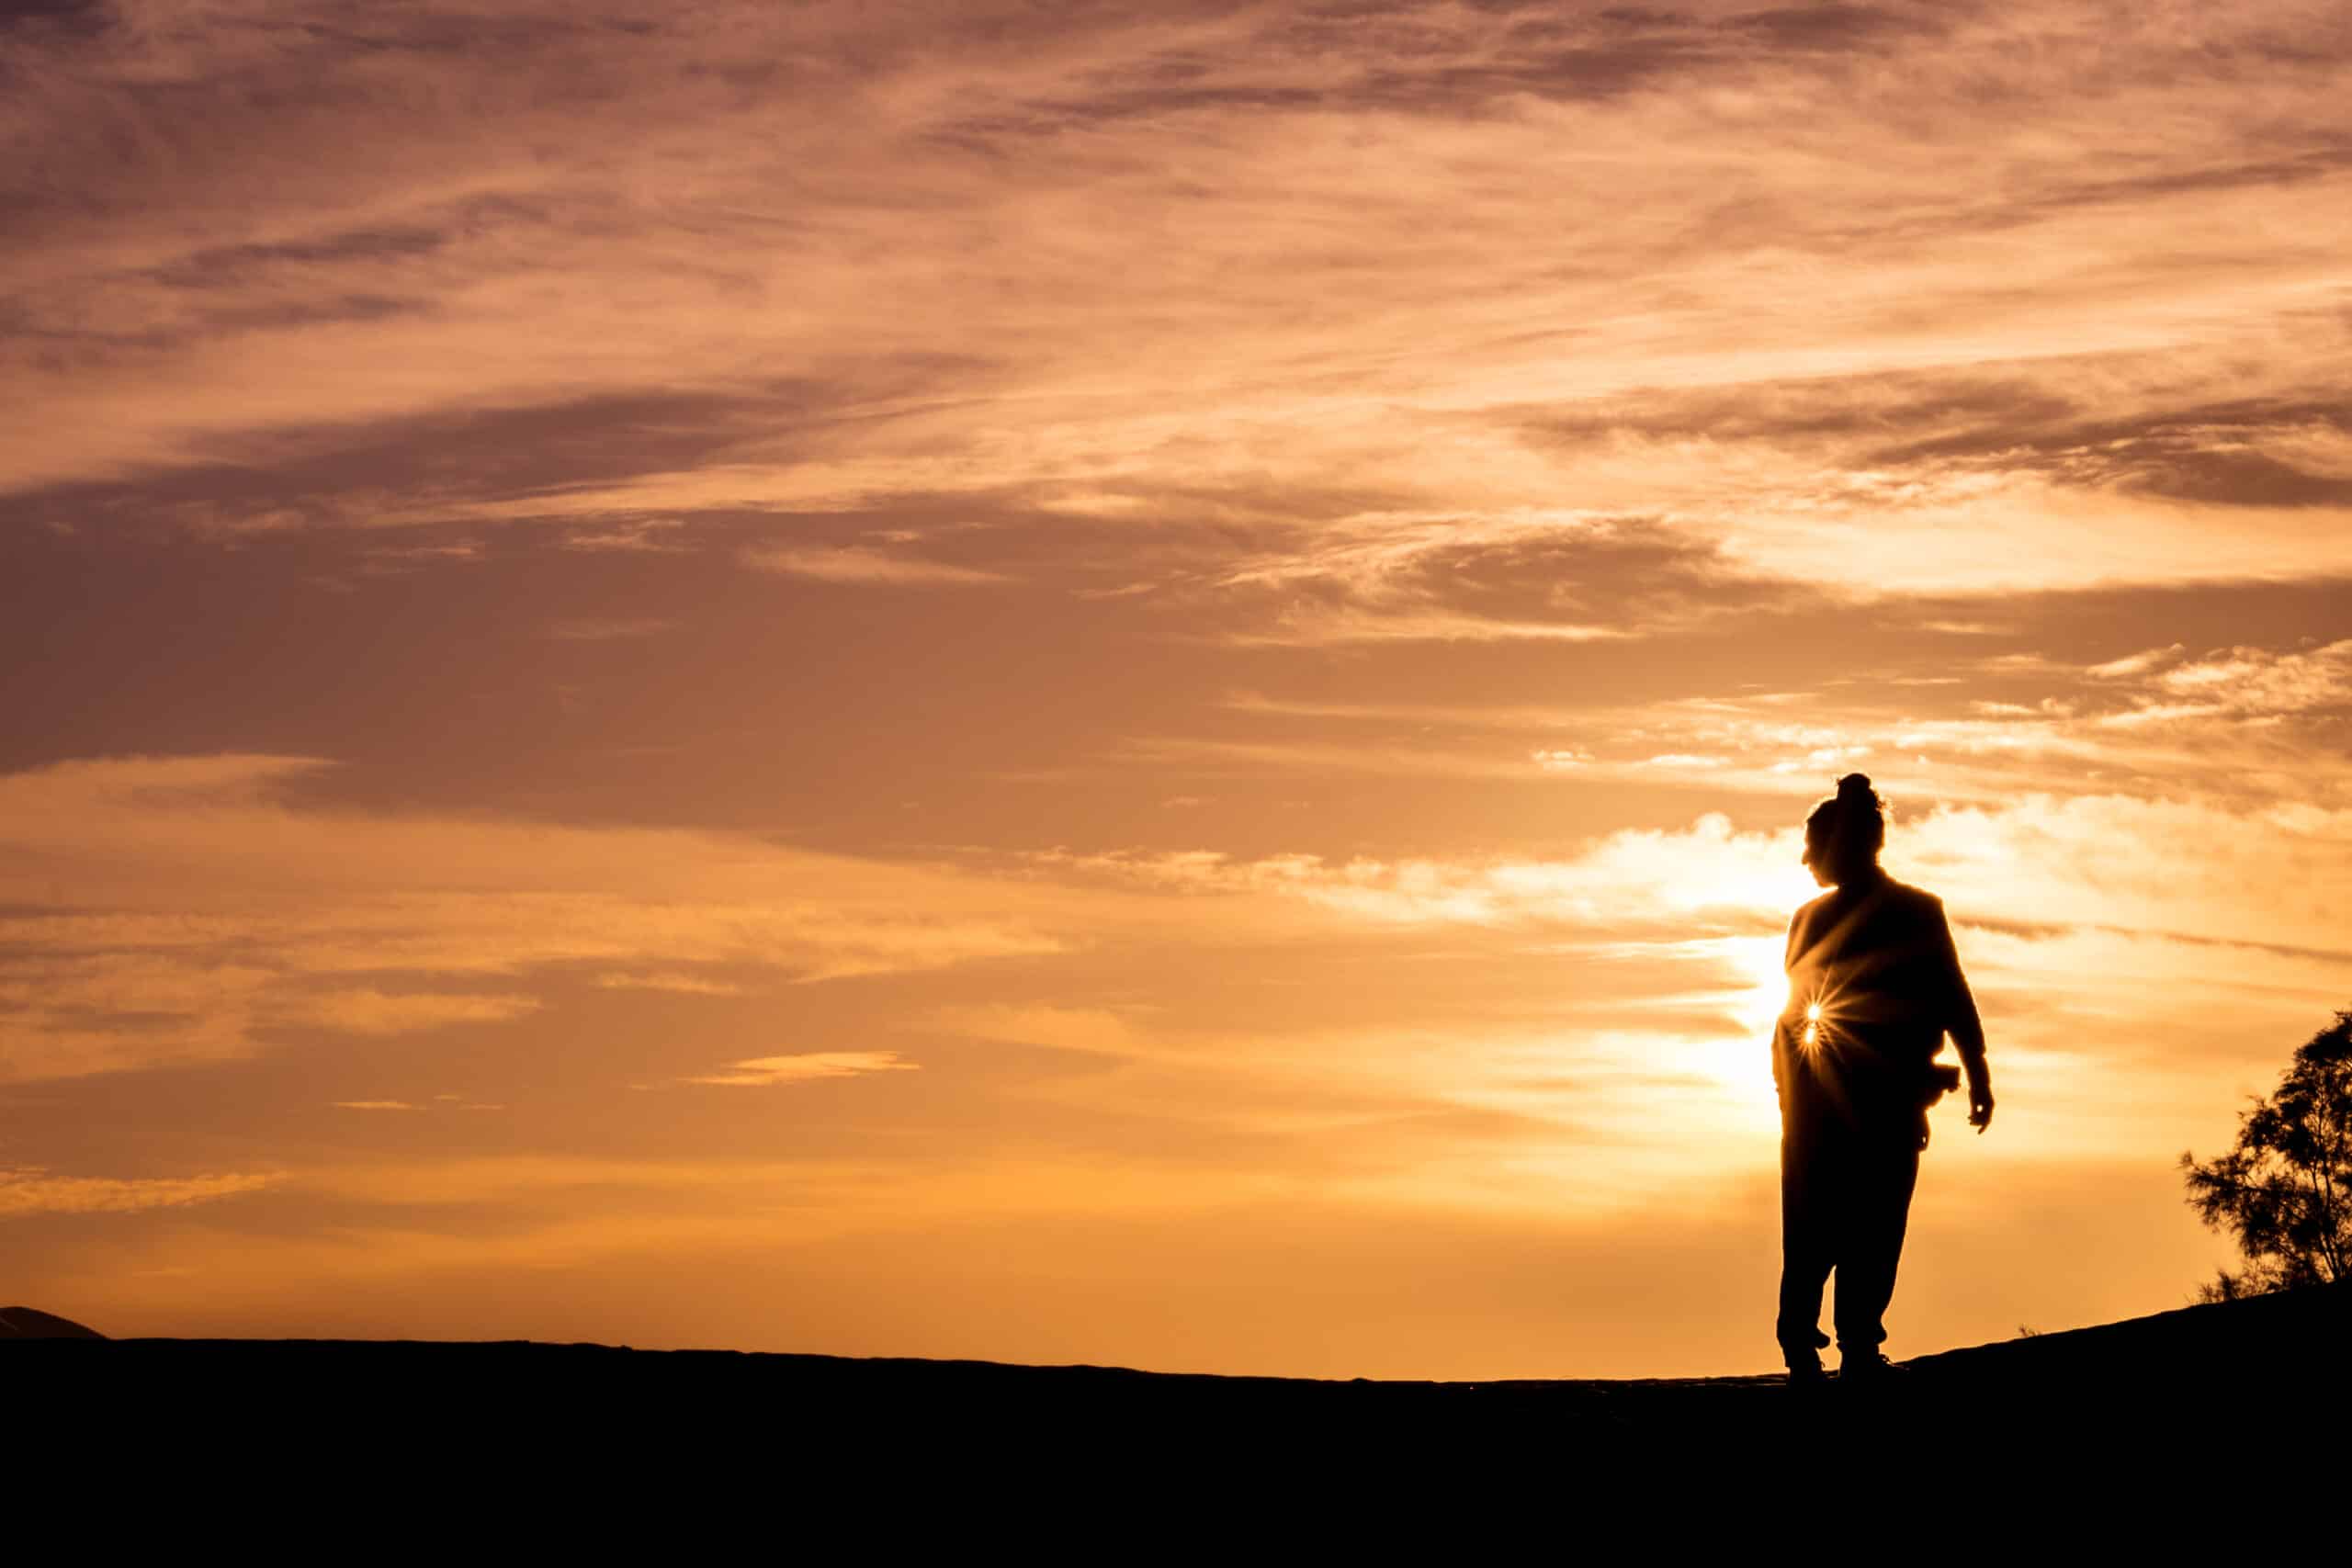 Silhouette of unrecognizable person standing in sunset light.